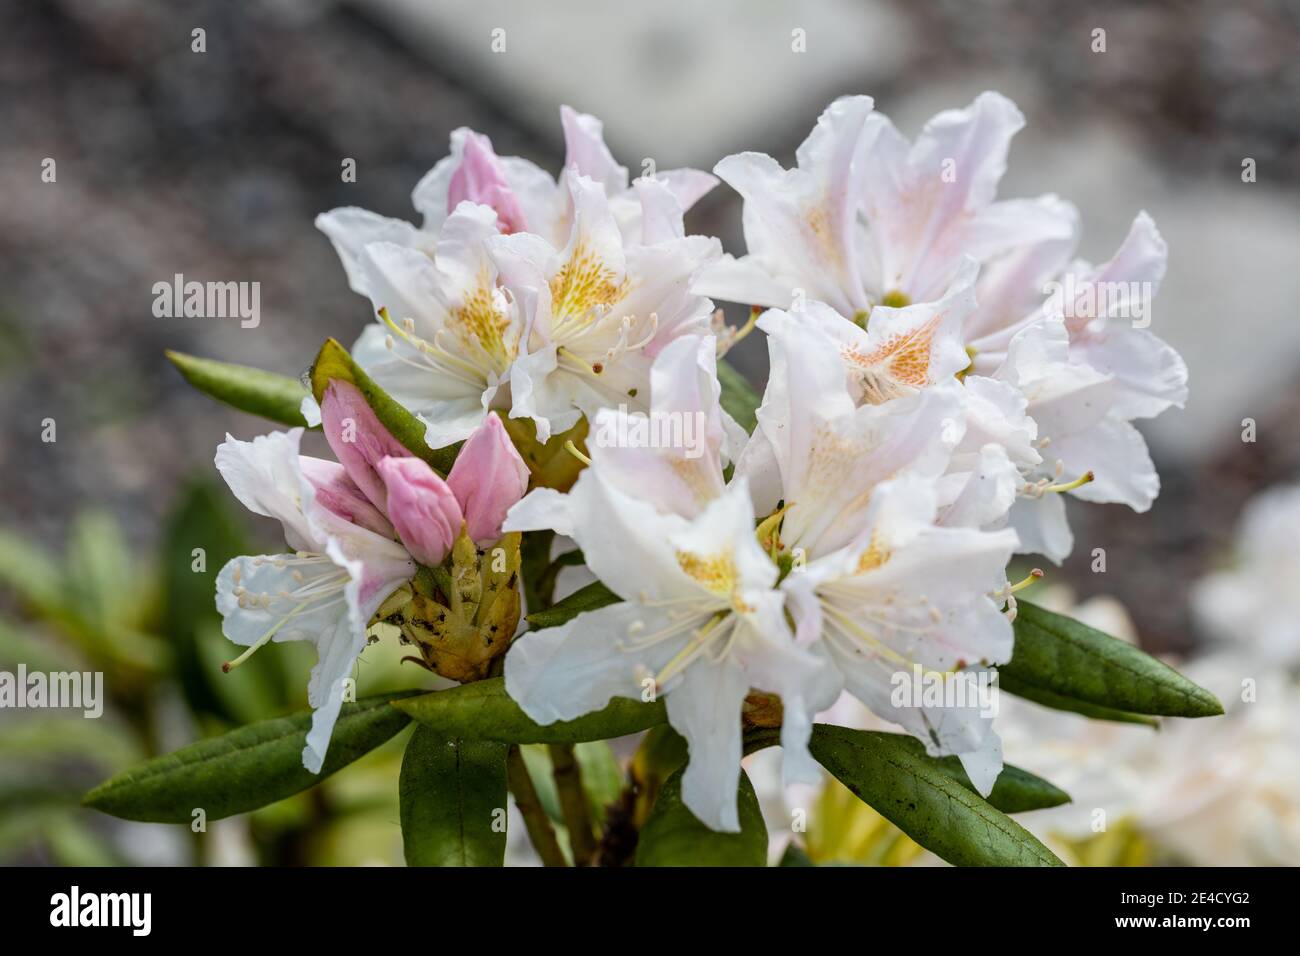 'Cunningham’s White' Hybrid rhododendron, Parkrododendron (Rhododendron caucasicum x ponticum var album) Stock Photo